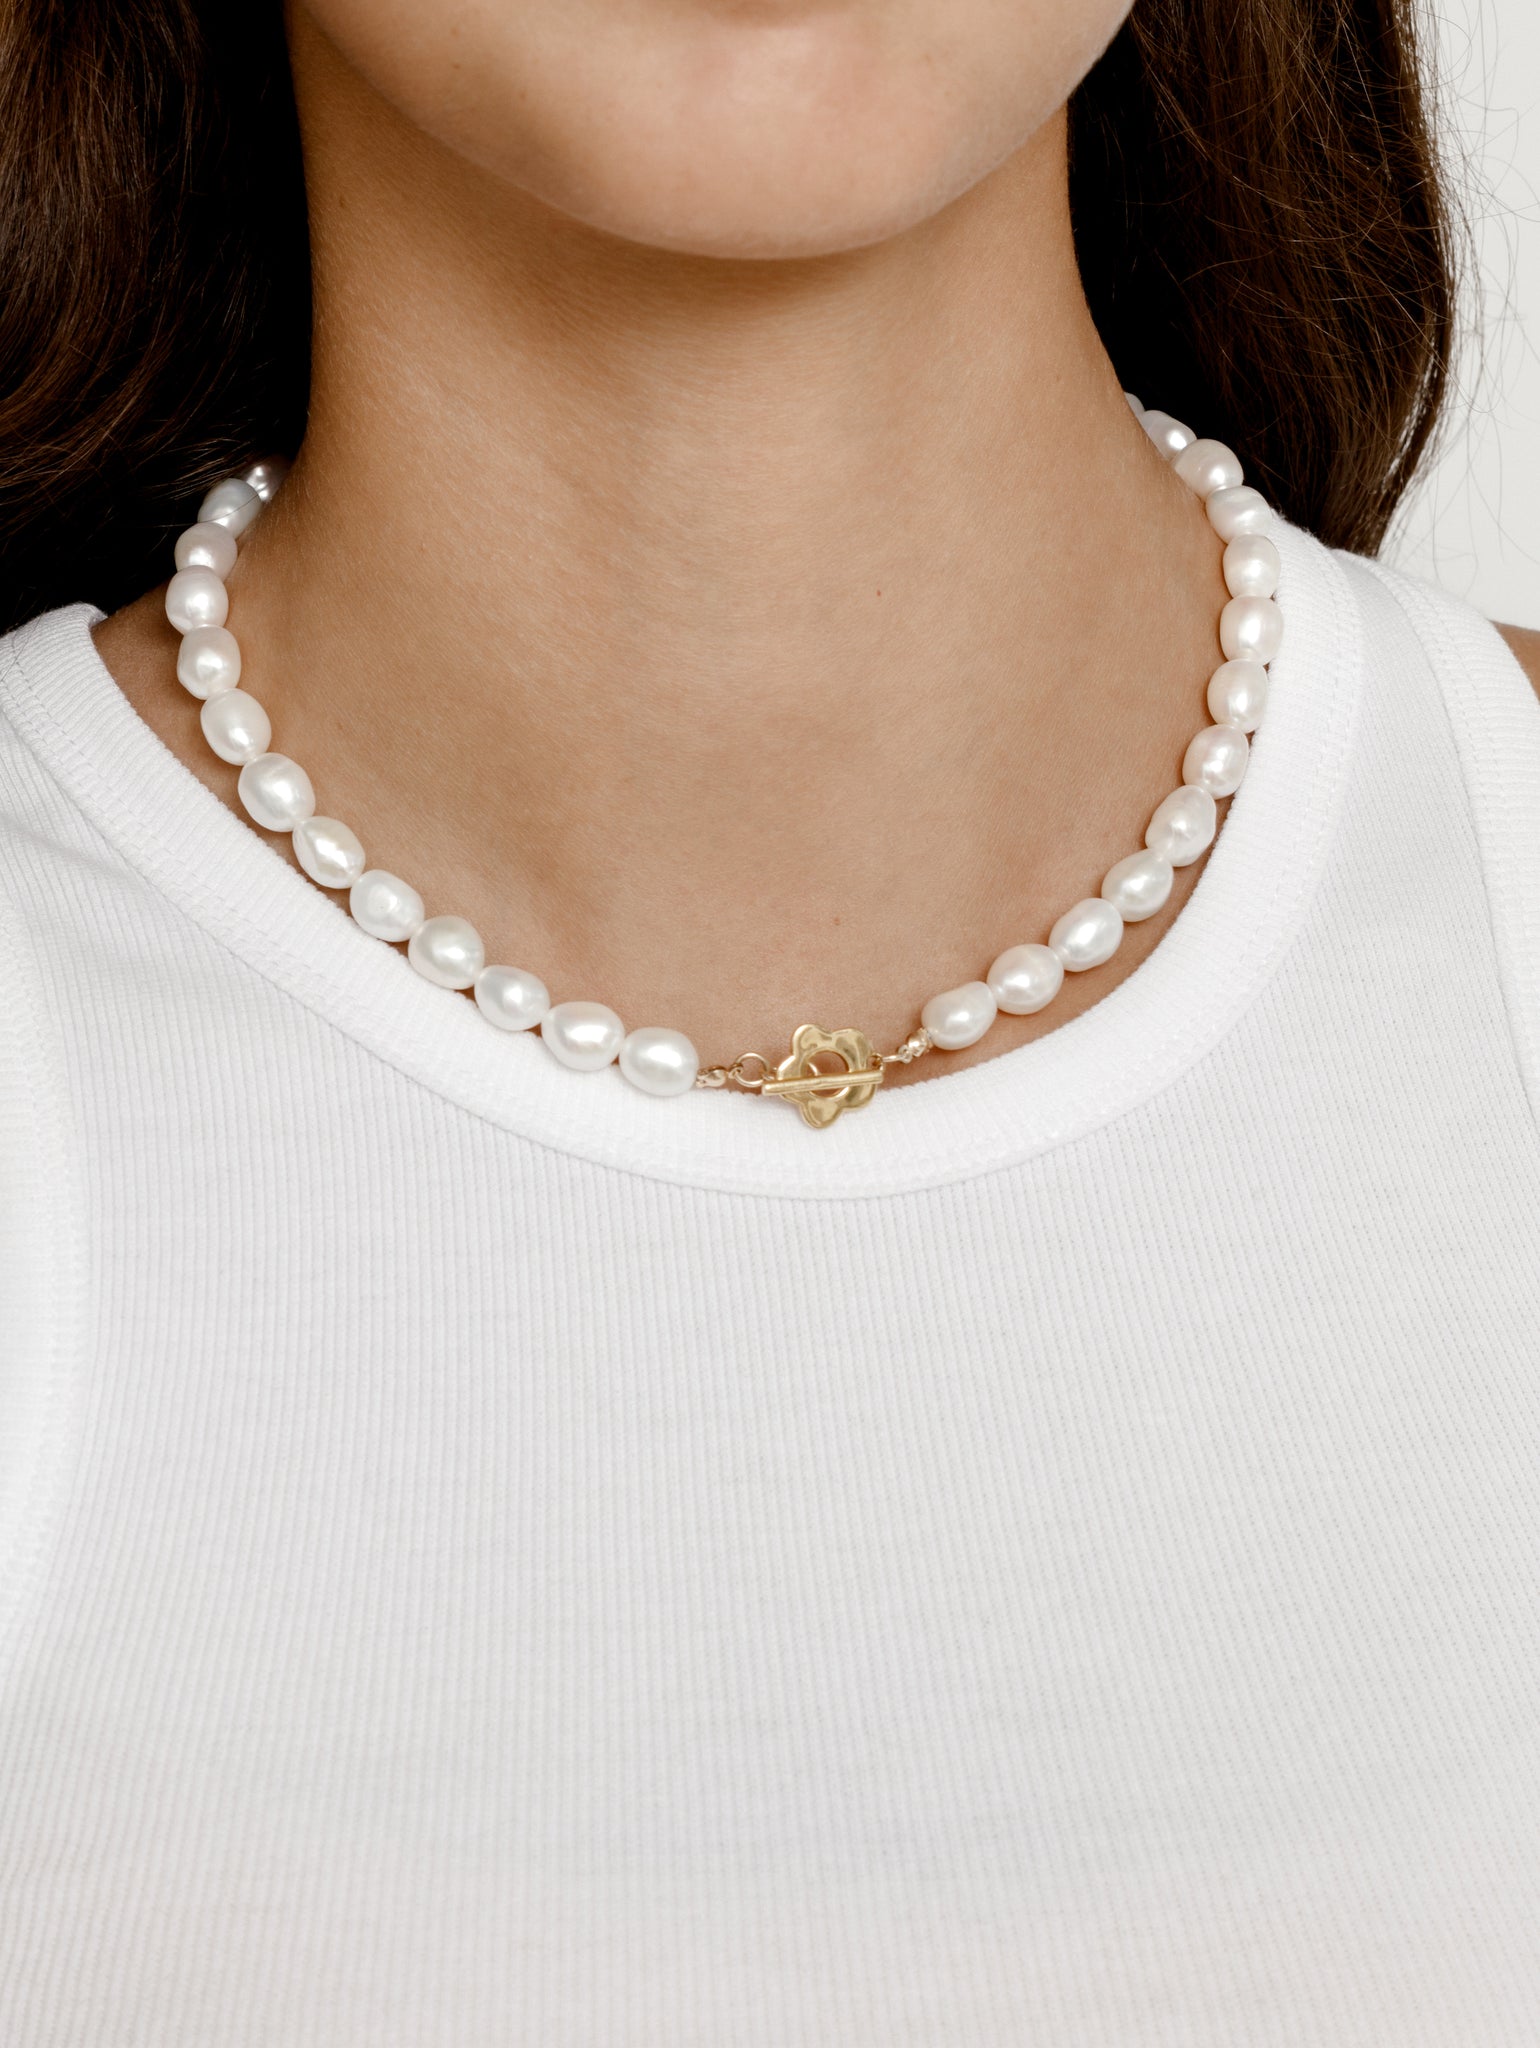 Wolf Circus Large Pearl Necklace w/ 14k Gold Flower Toggle | Lola Pearl Necklace in Gold-Necklaces-wolfcircus.com